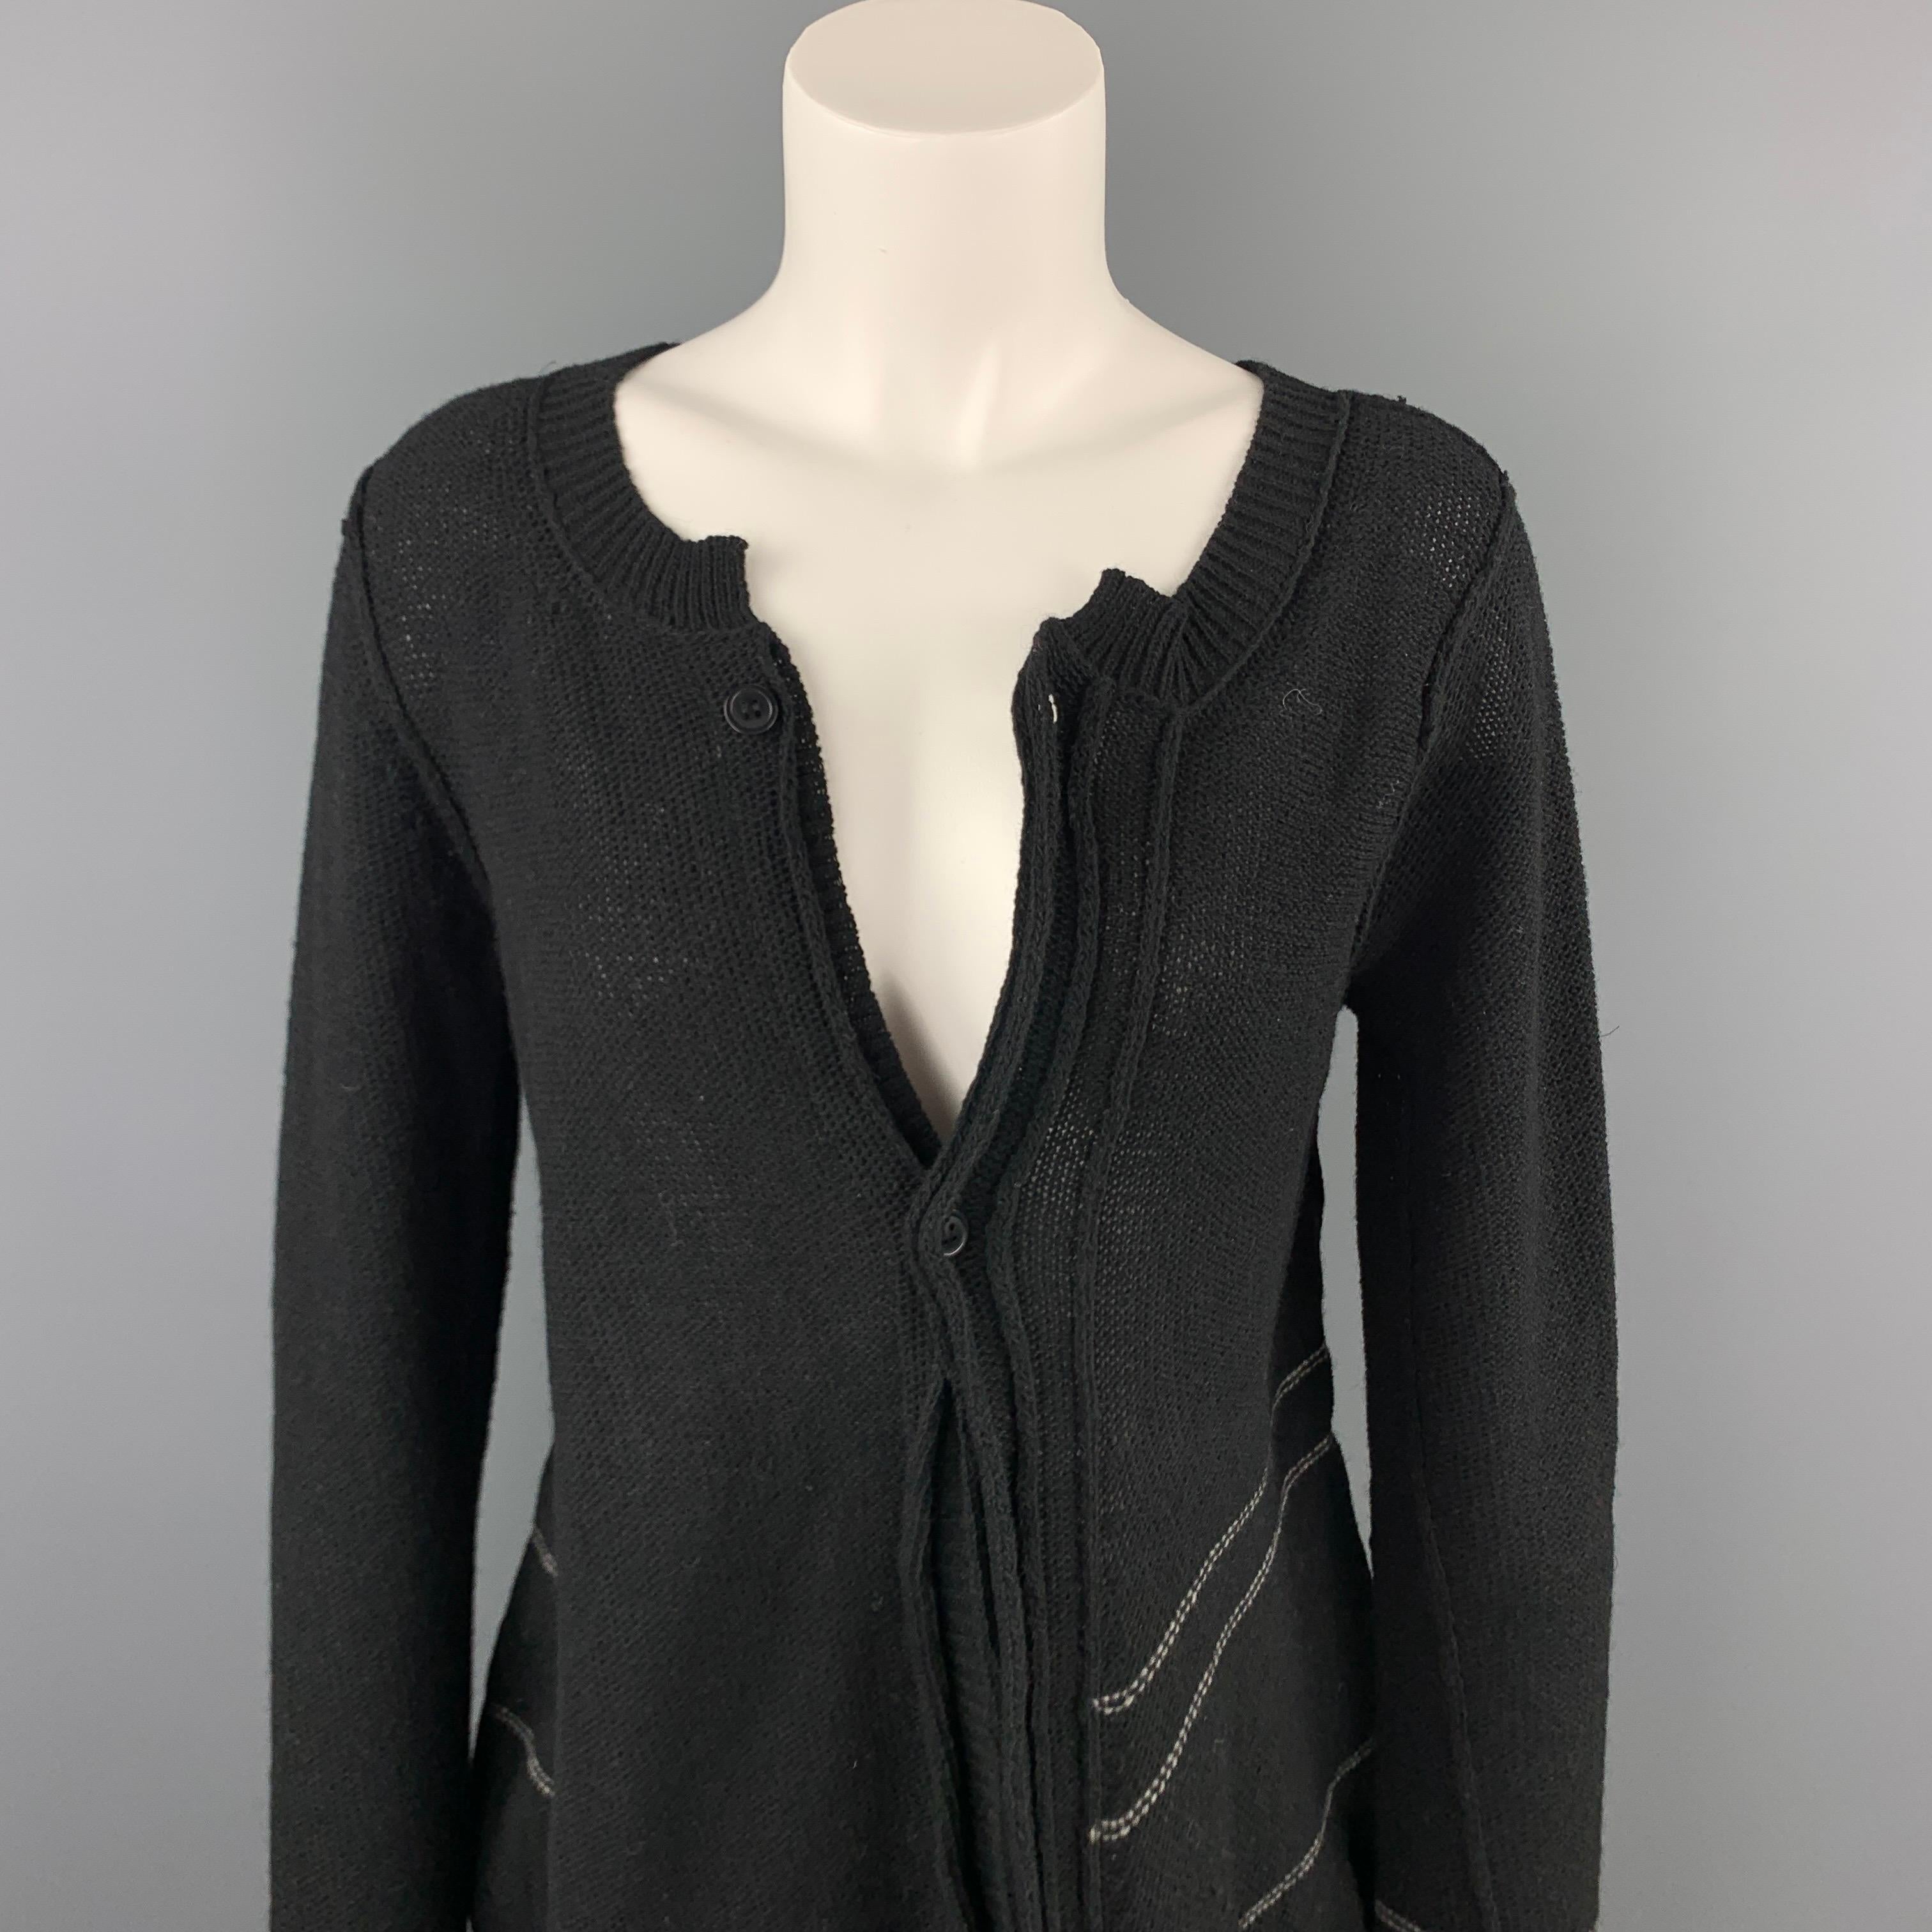 YOHJI YAMAMOTO NOIR cardigan comes in a black knitted wool with a white stripe detail featuring an asymmetrical design and a buttoned closure. 

Very Good Pre-Owned Condition.
Marked: 2

Measurements:

Shoulder: 15 in. 
Bust: 34 in. 
Sleeve: 29 in.